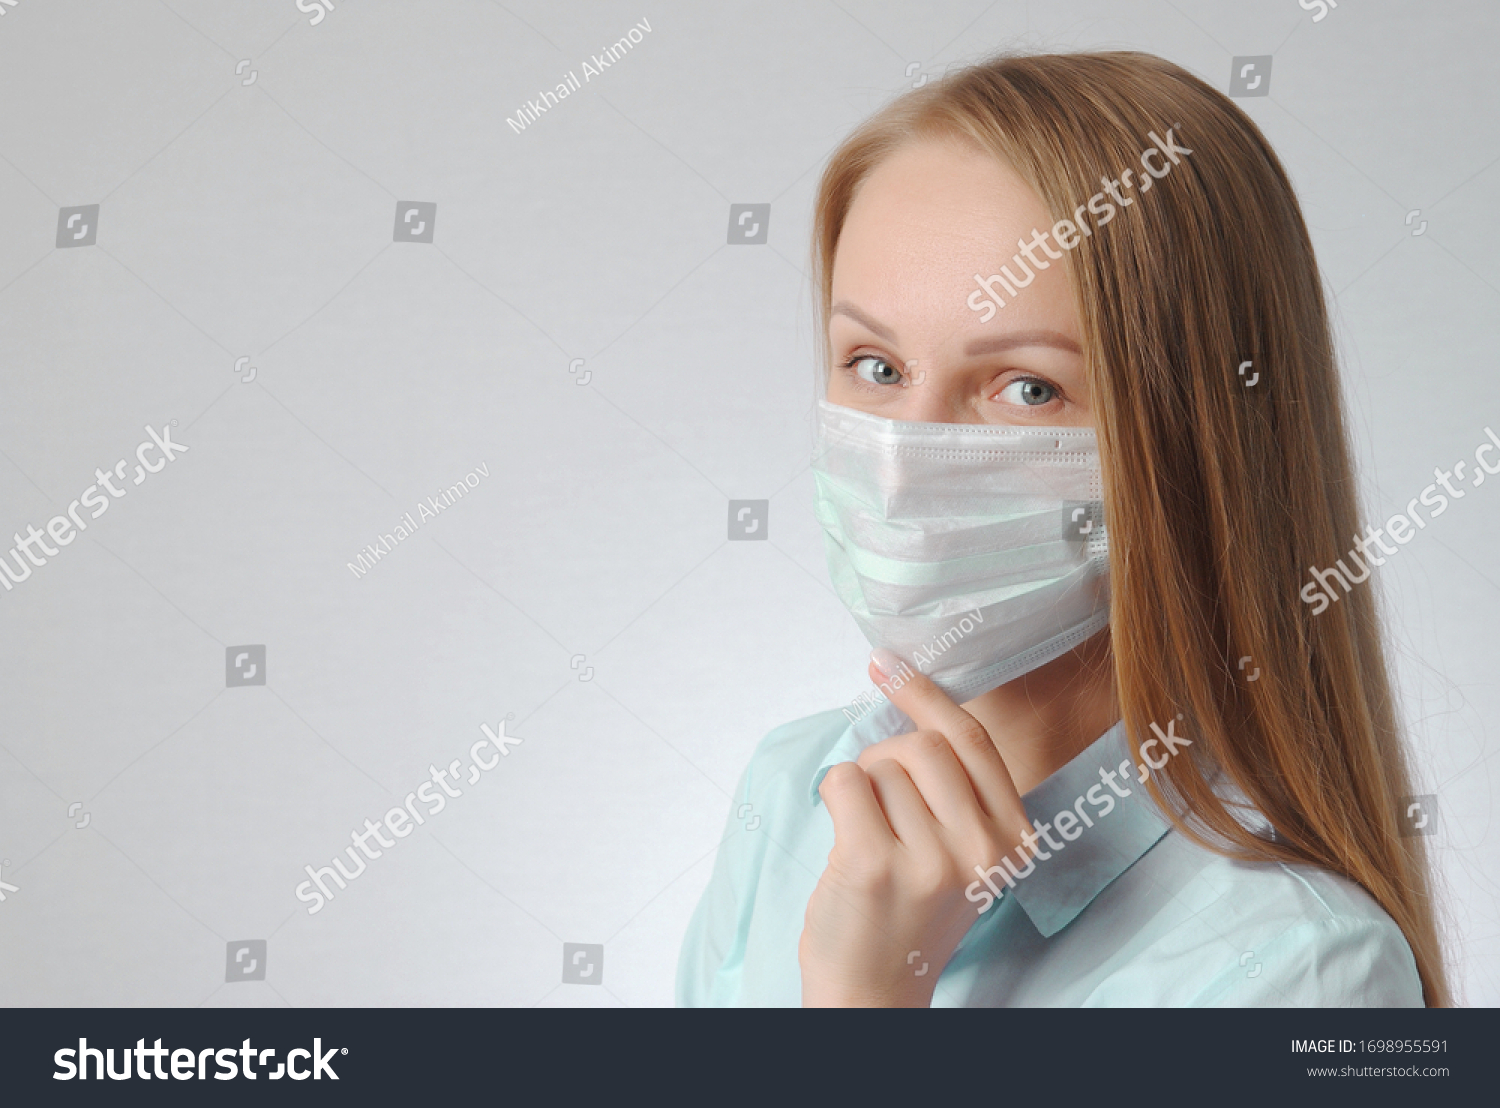 woman with medical mask. portrait of blonde girl. virus and health protection poster concept #1698955591